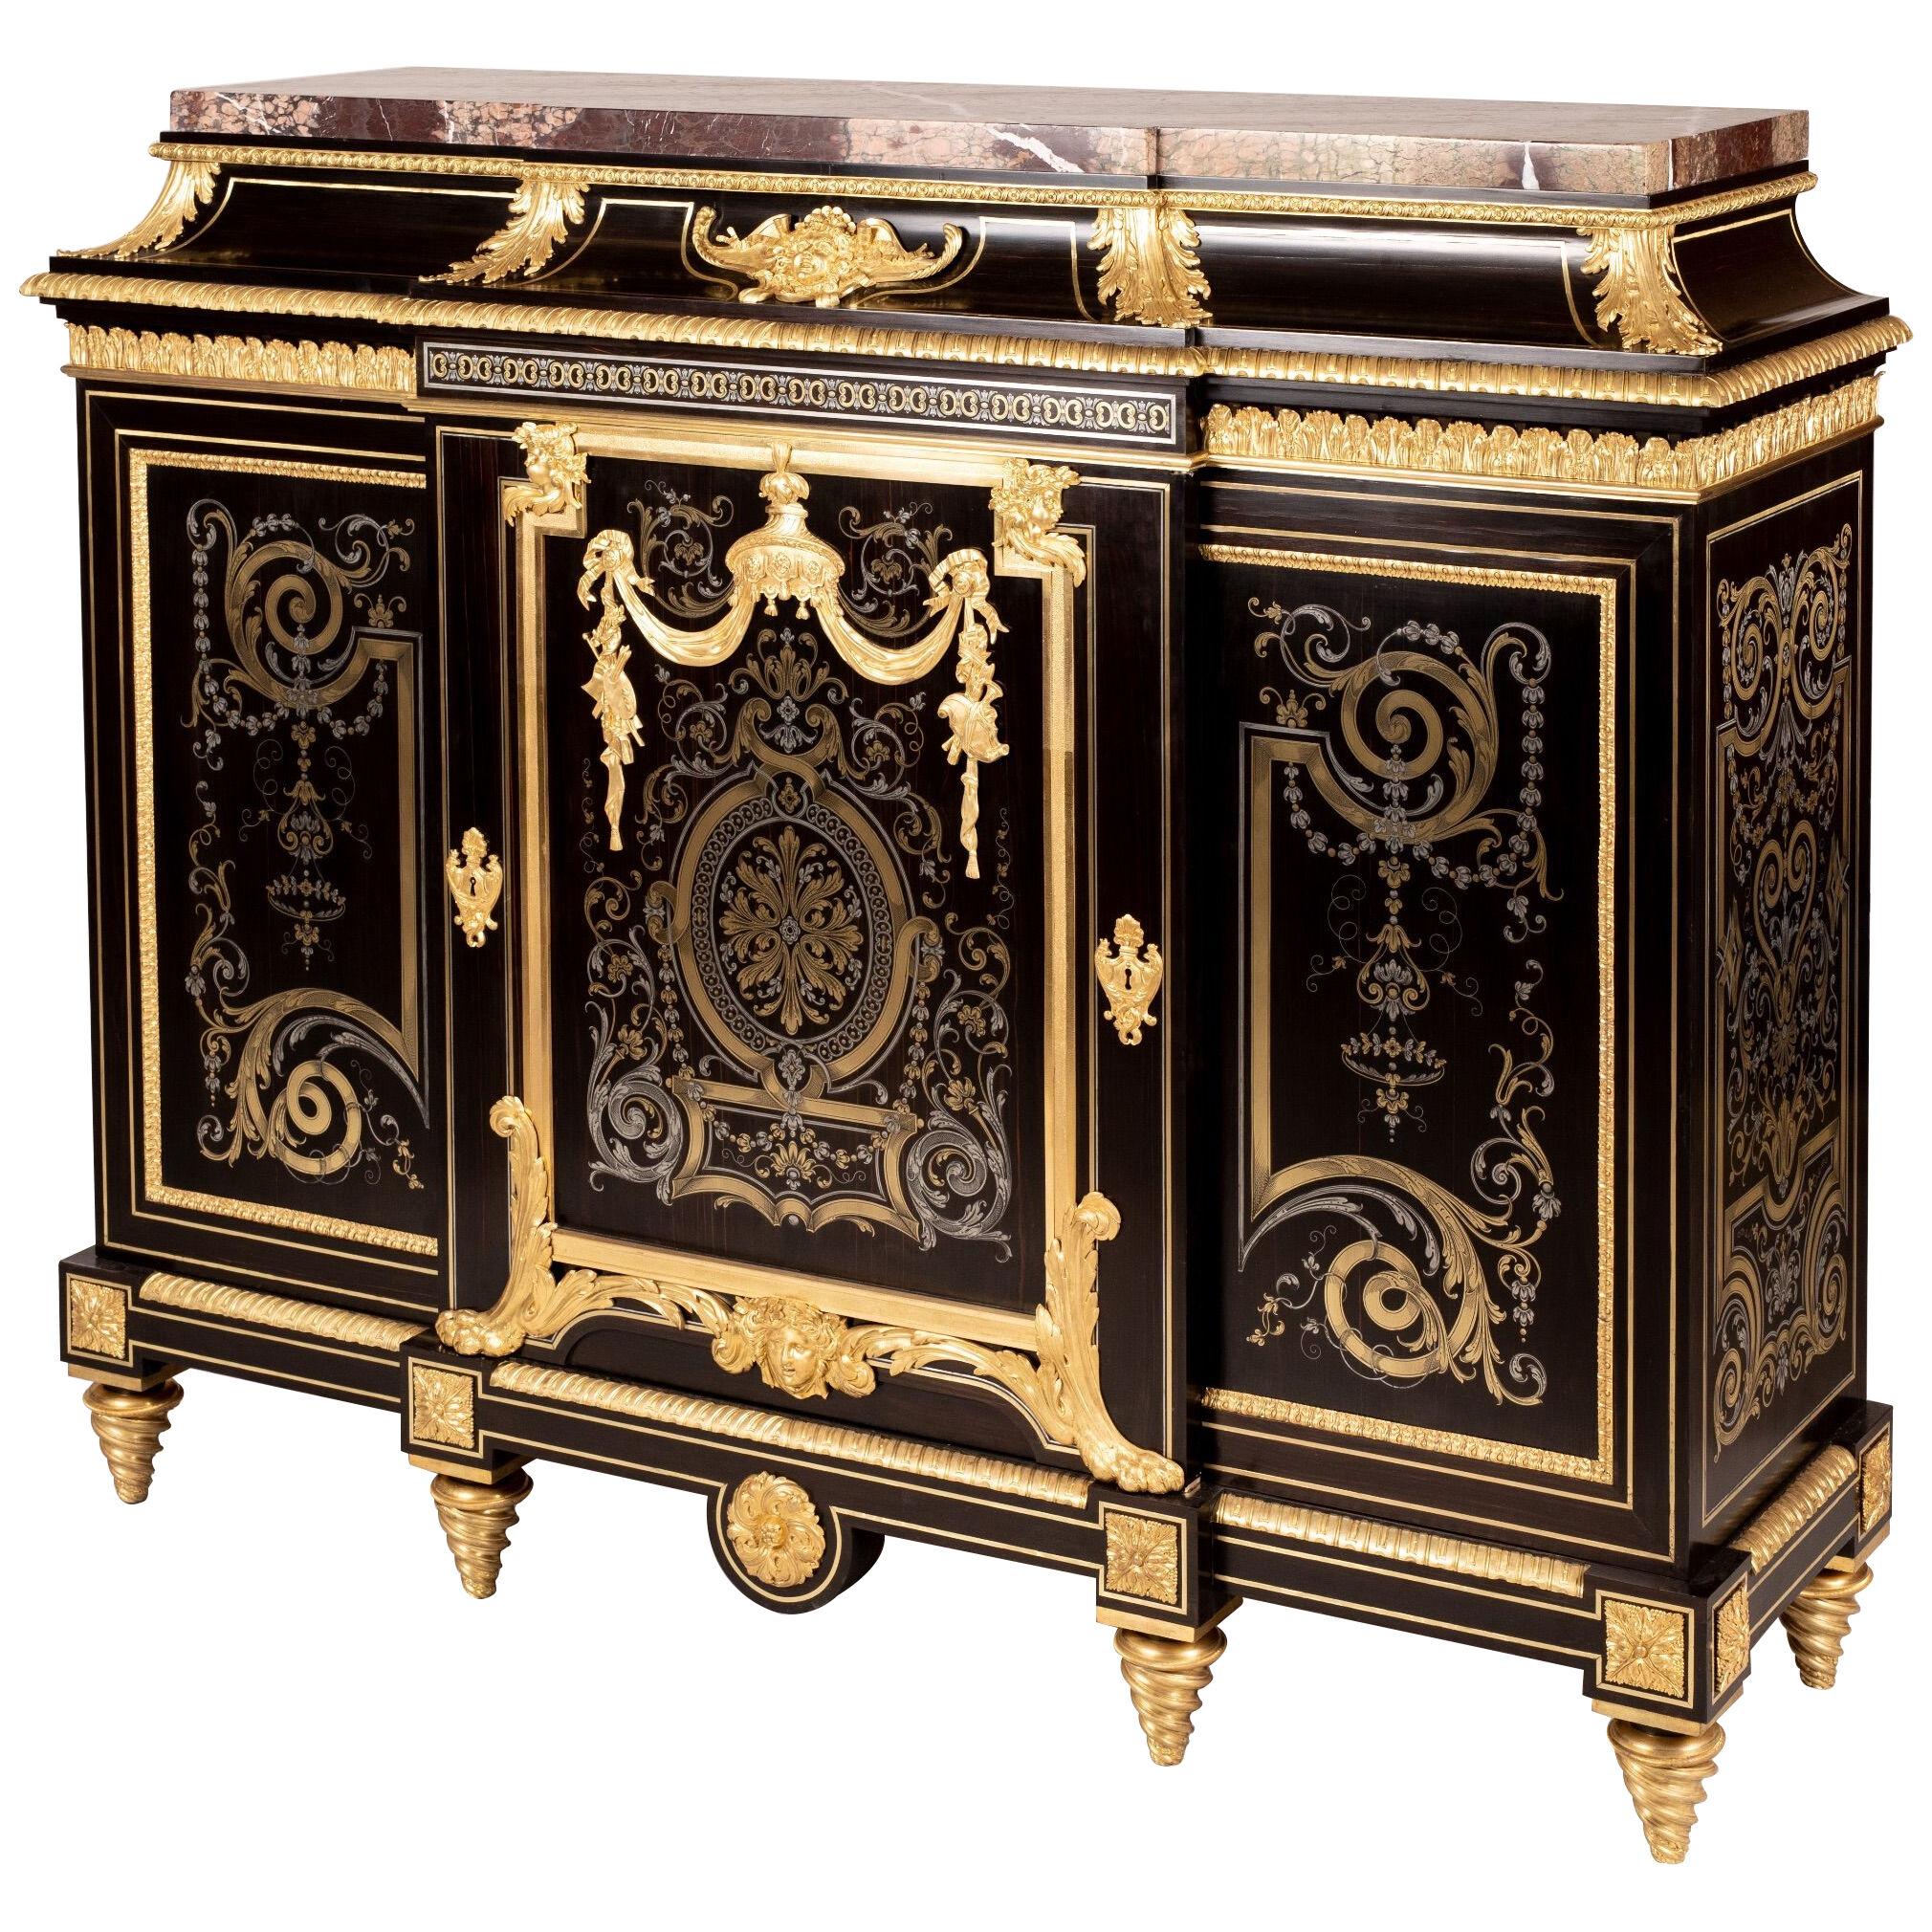 Superb 19th Century Marquetry Cabinet in the Louis XIV Manner